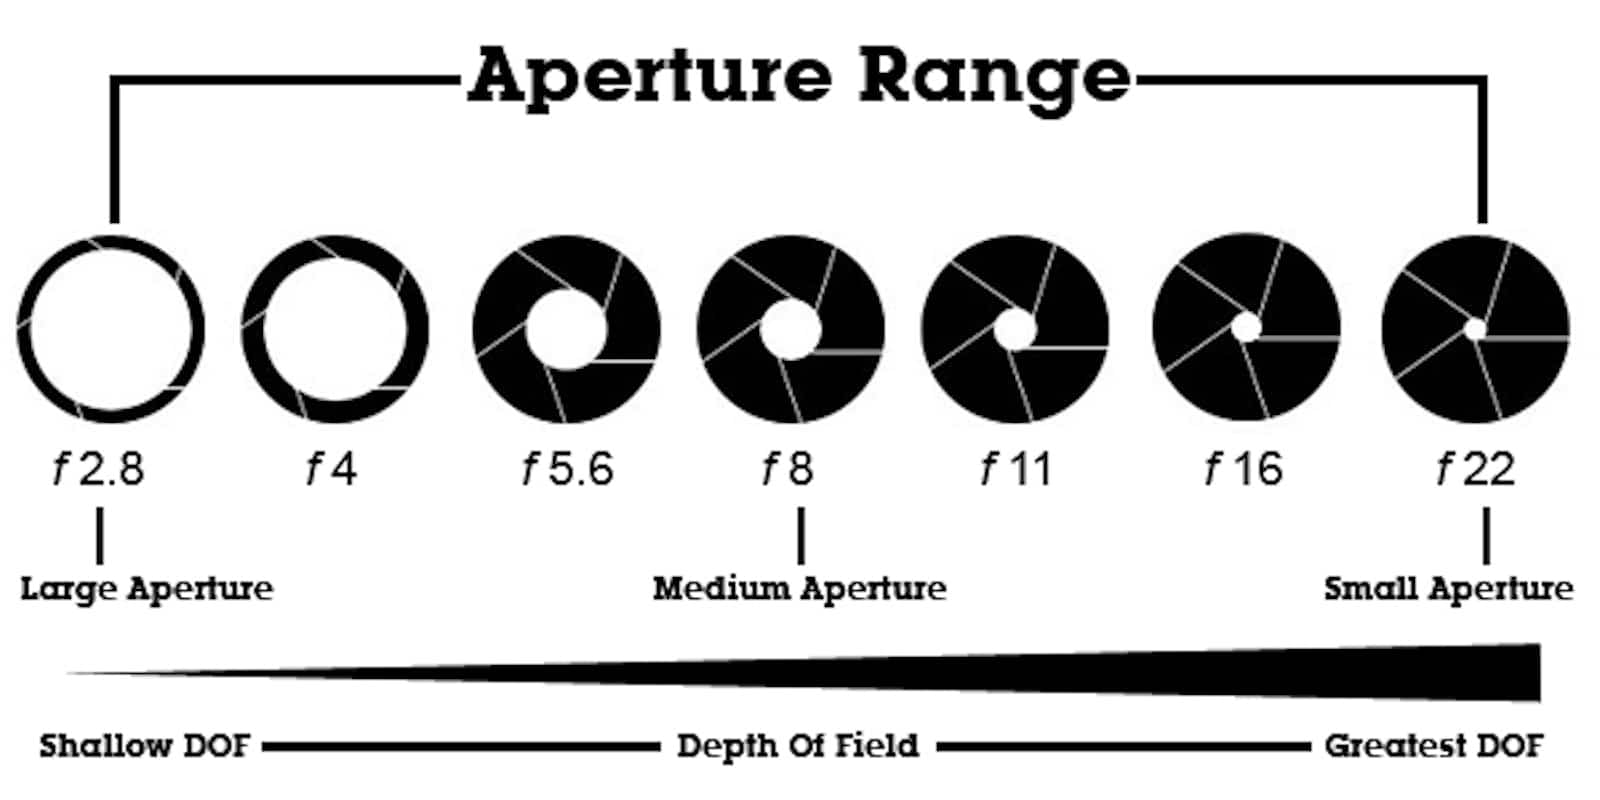 depth of field refers to